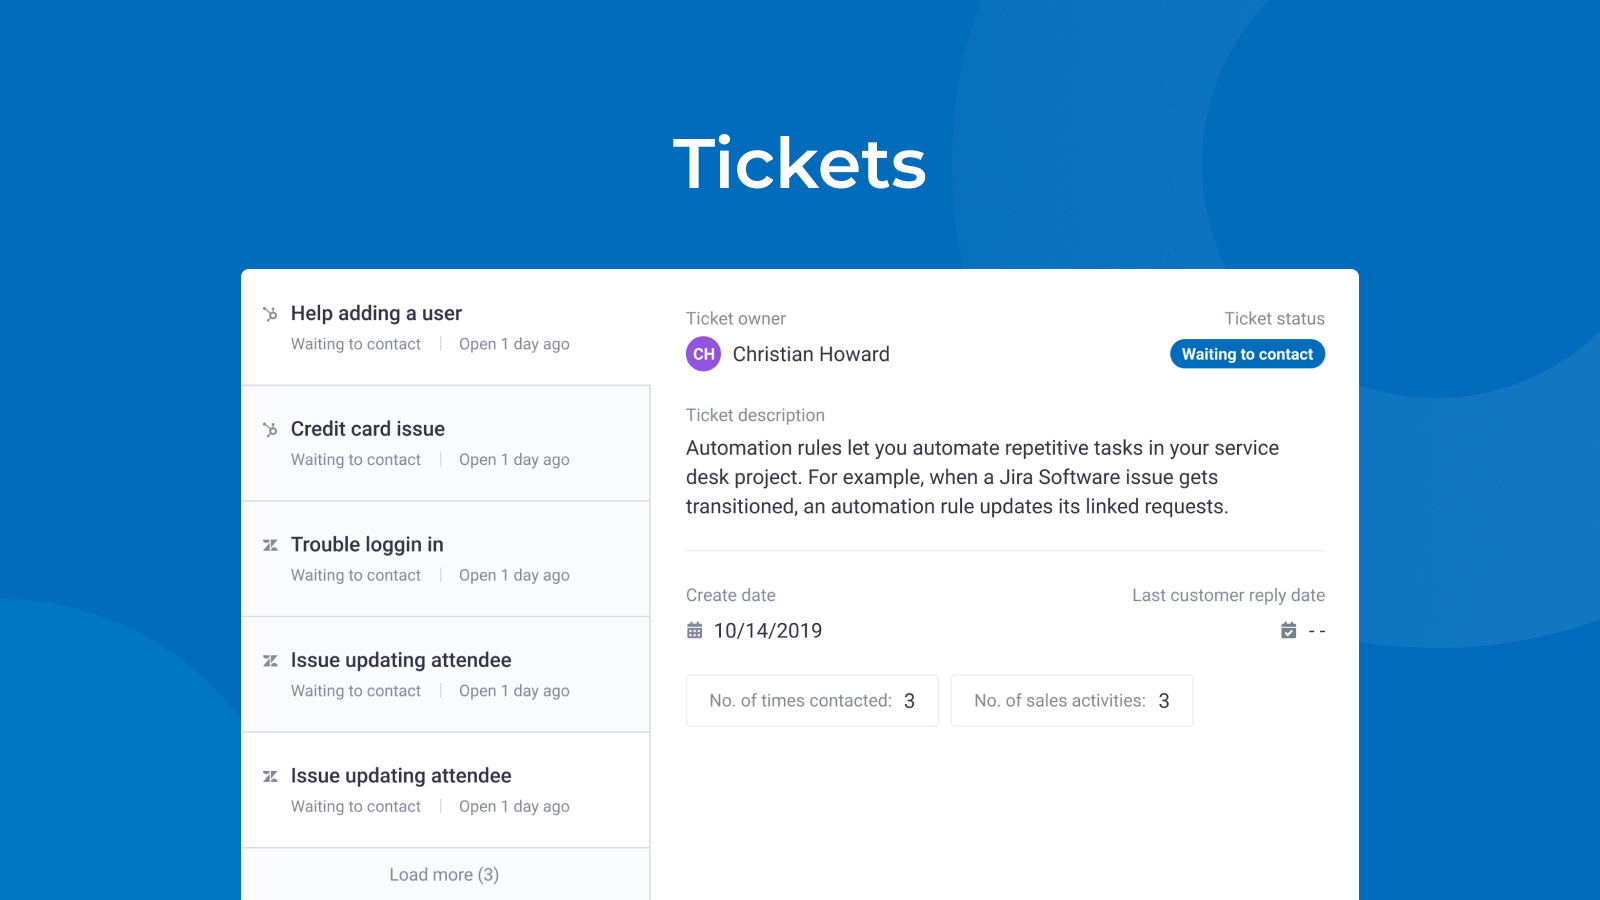 Synchronize tickets from Hubspot to Custify